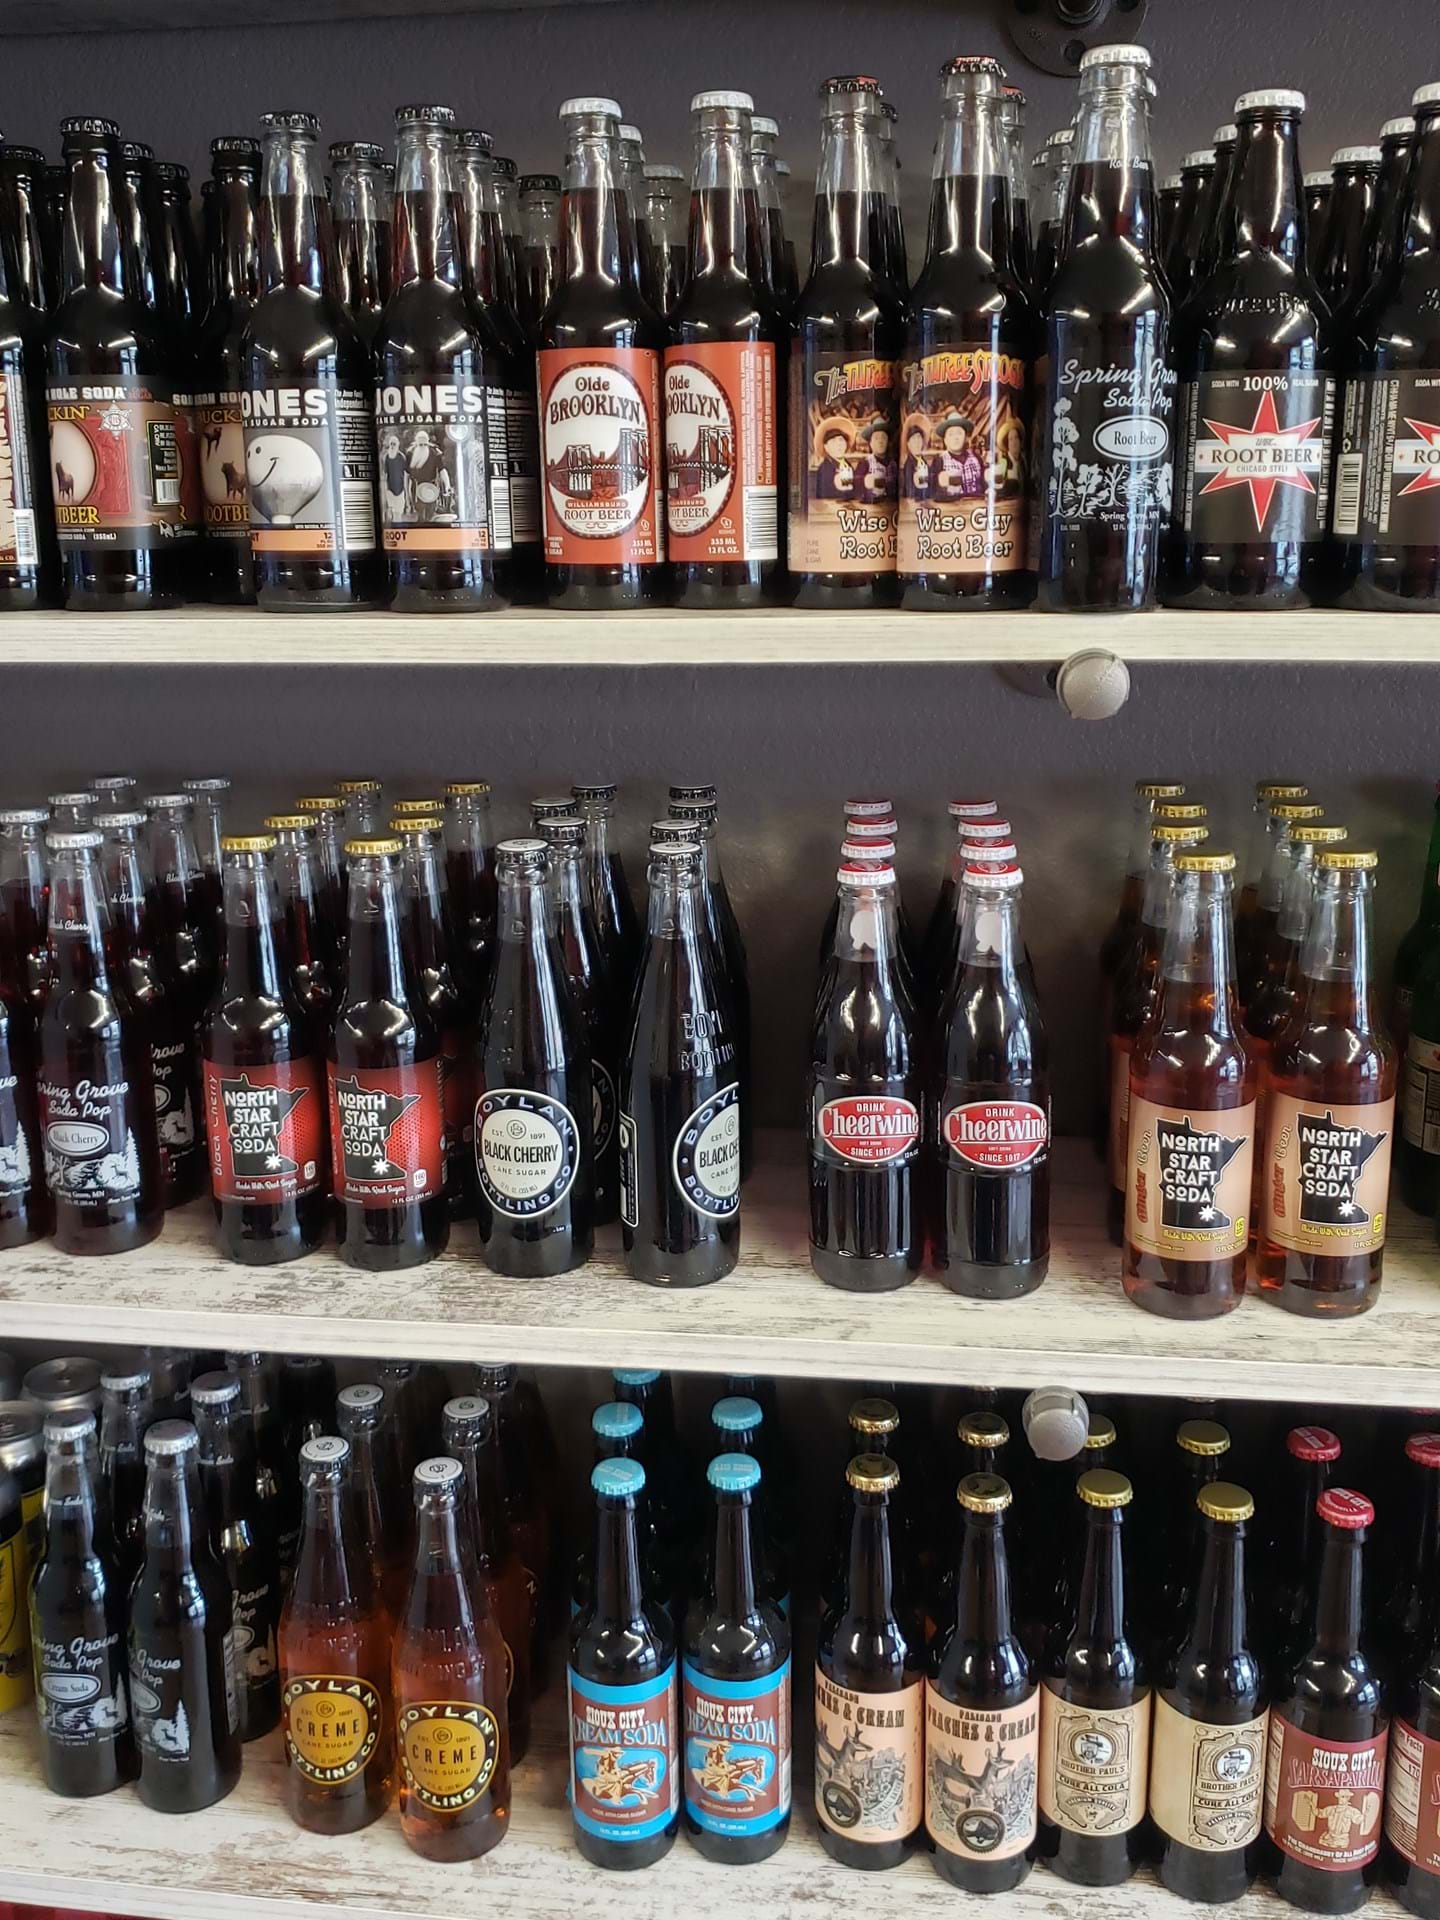 Dozens of sodas to choose from